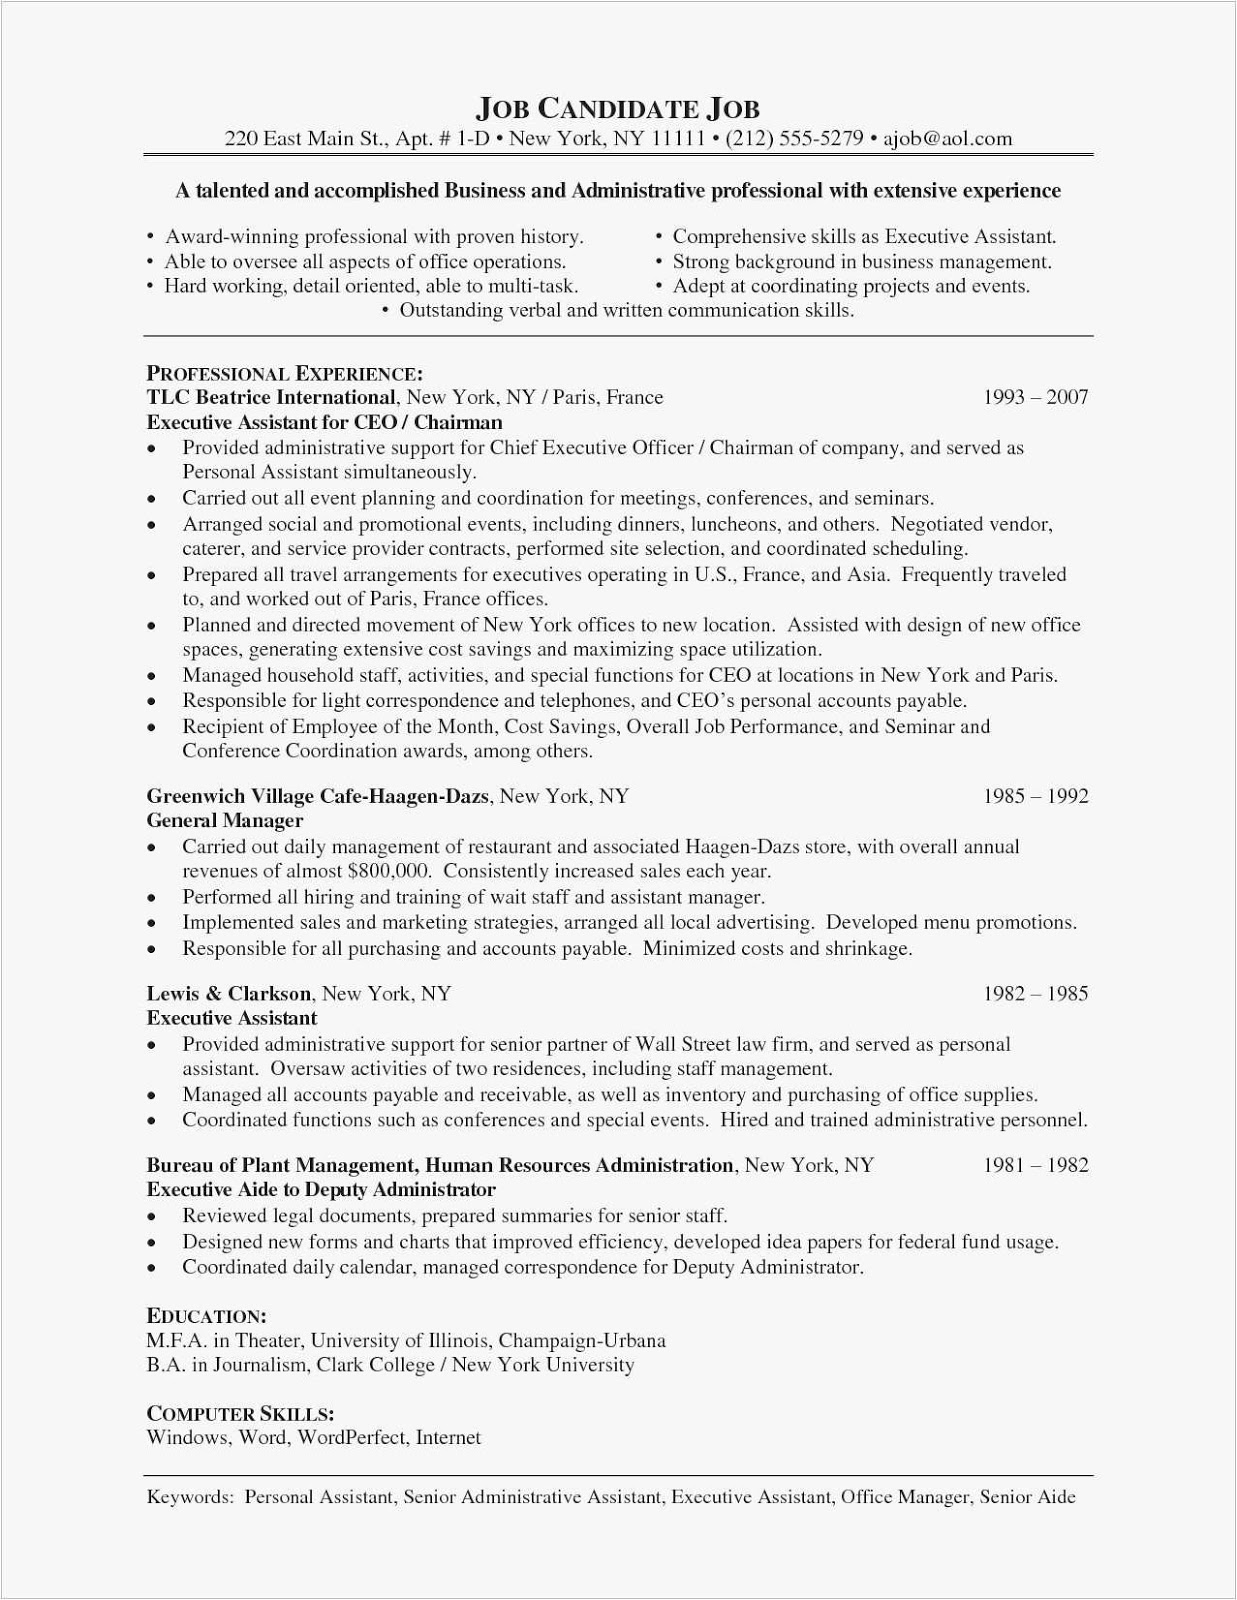 Administrative Assistant Resume Summary, administrative assistant resume summary examples, administrative assistant resume summary 2019